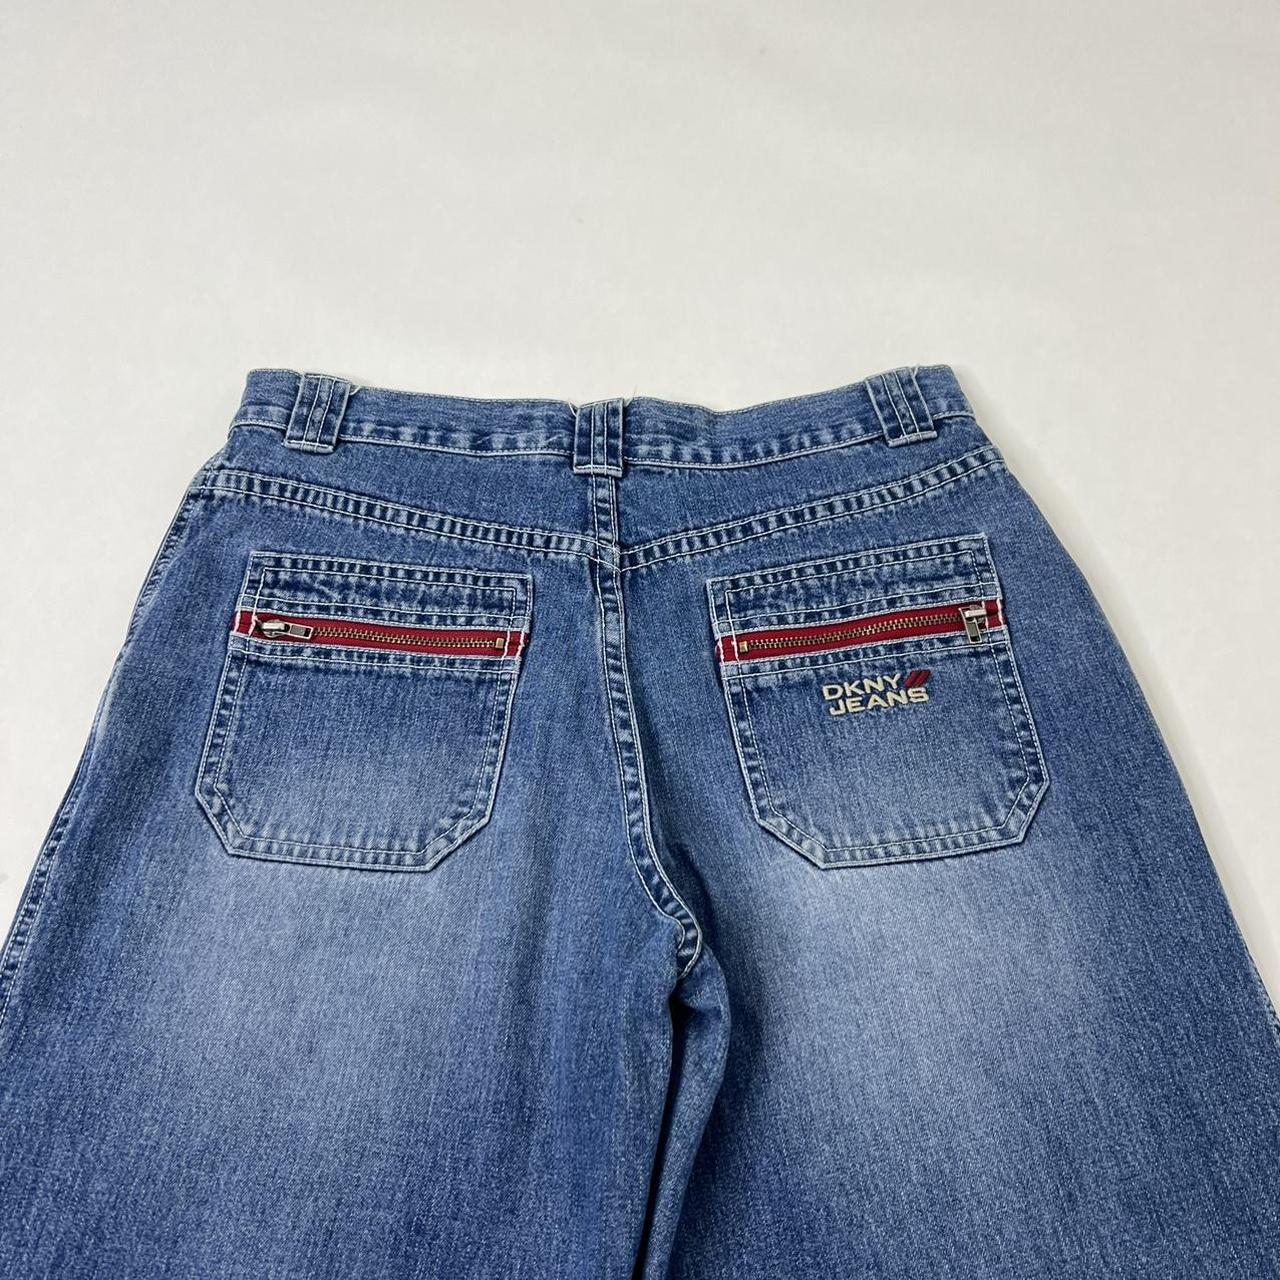 DKNY Women's Blue and Red Jeans (2)